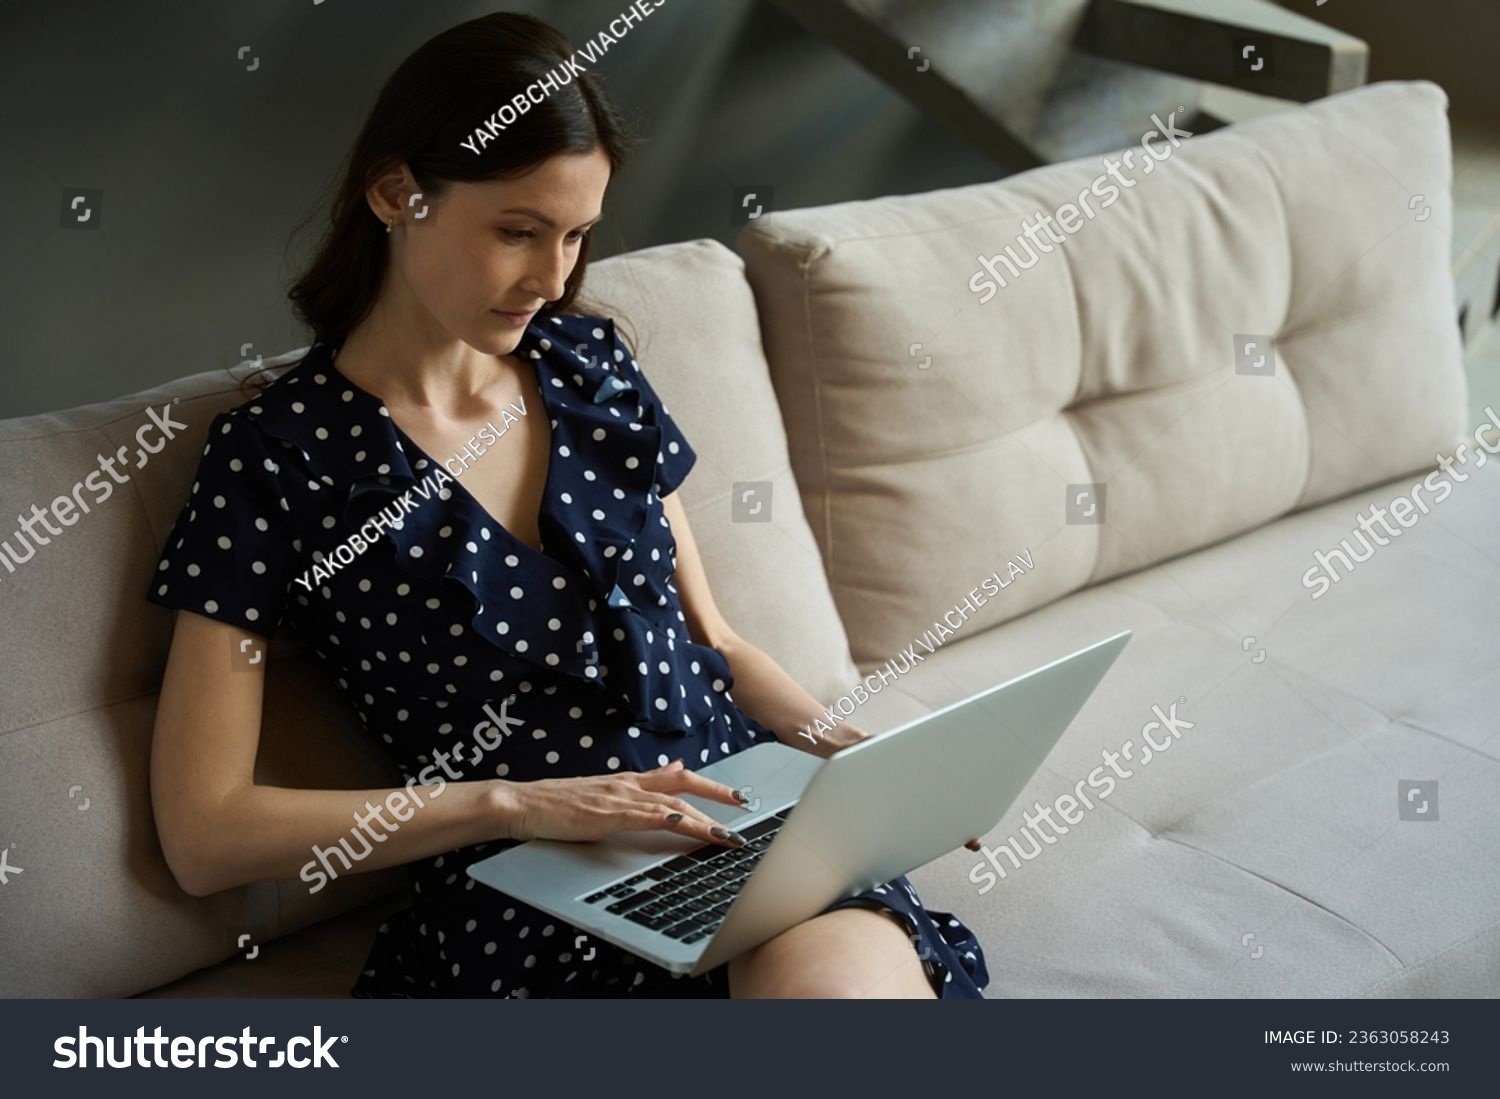 Female sits at home on couch and works on laptop #2363058243